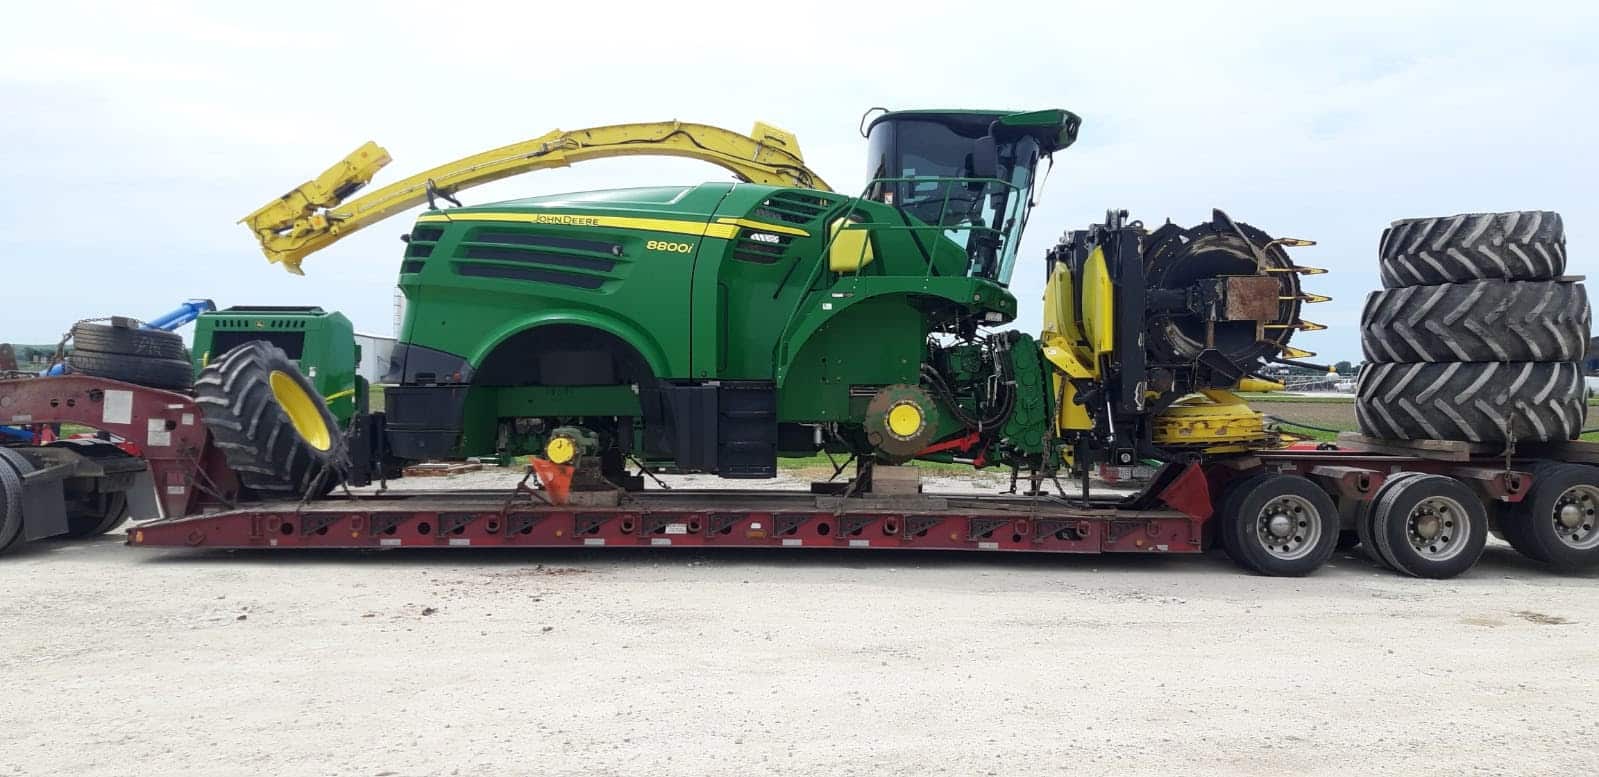 Shipping a John Deere SPFH 8800 Harvester and header on a lowboy trailer